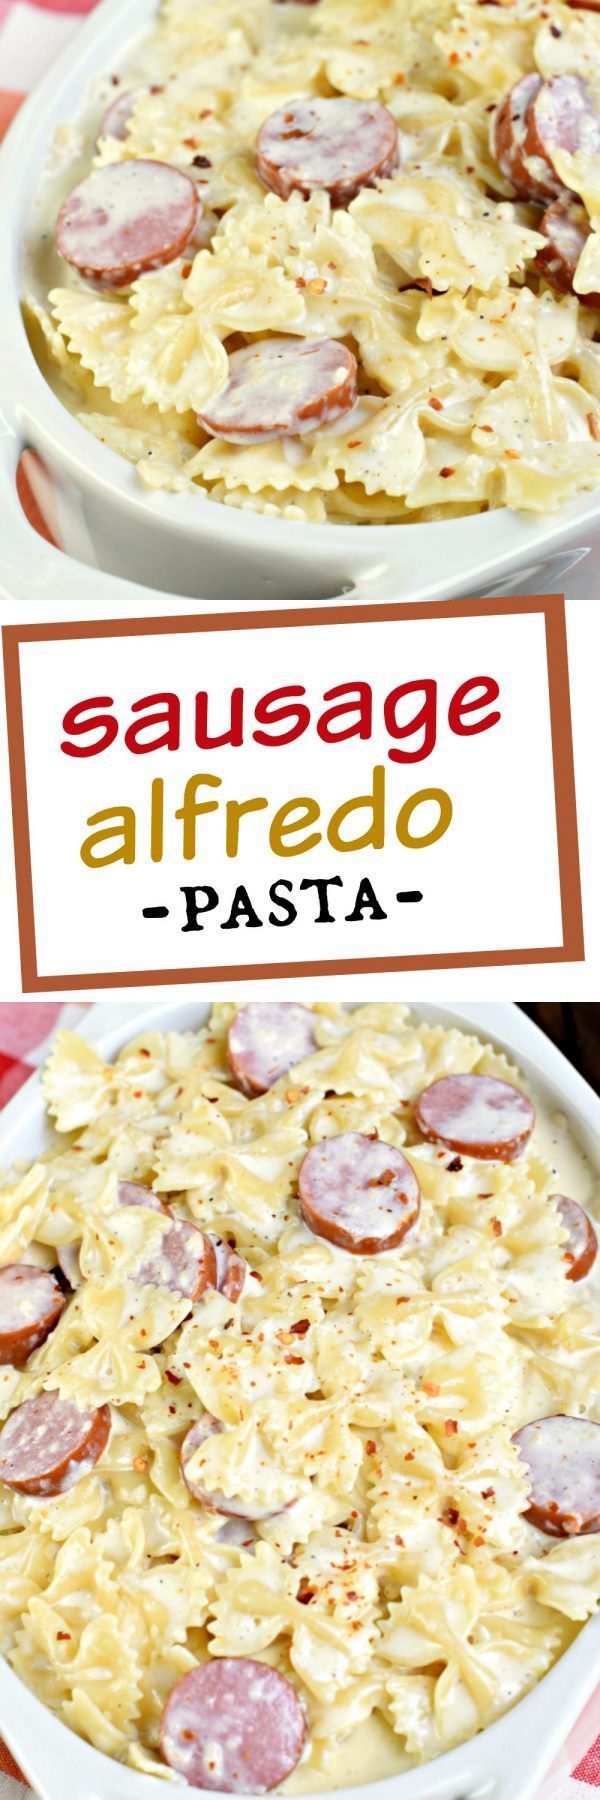 Creamy, Sausage Alfredo Pasta is a quick and versatile dinner recipe that is on the table in under 30 minutes!